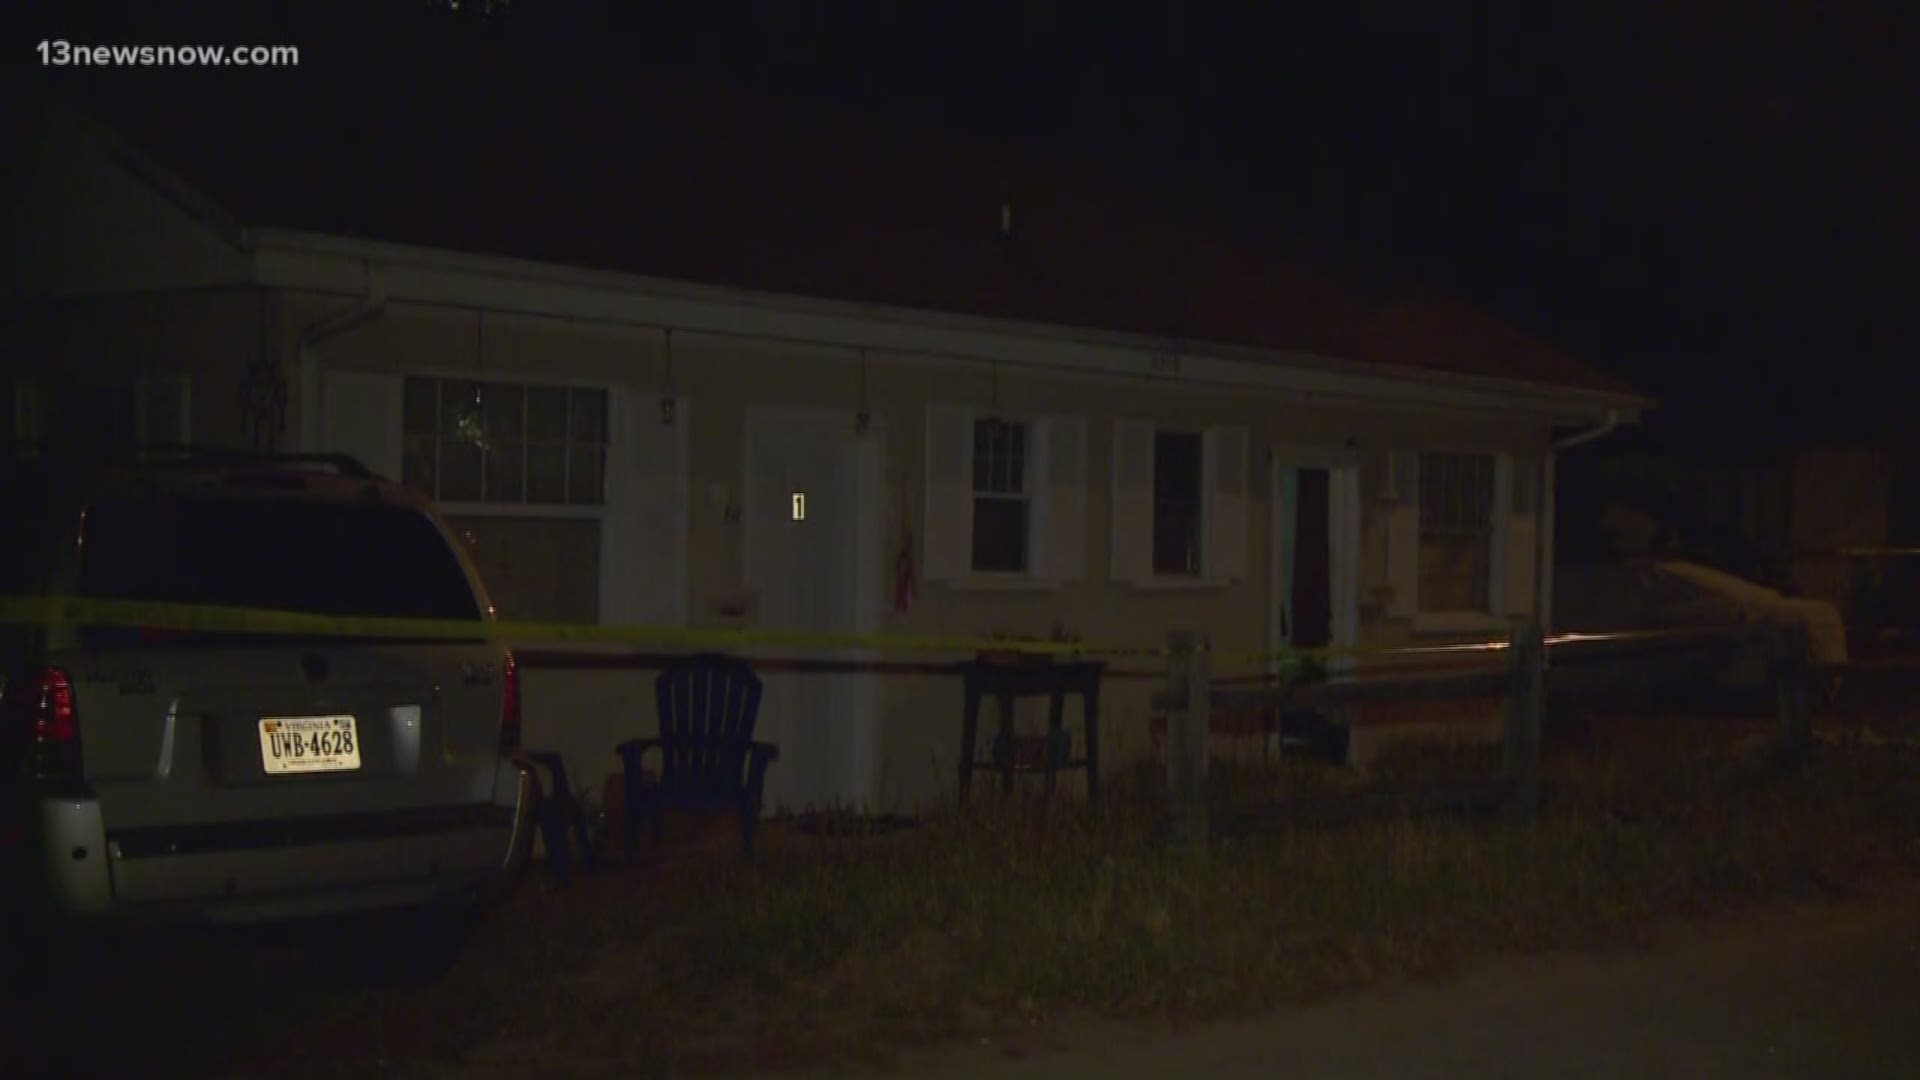 A man was found shot at a home in on Mortons Road in Chic's Beach.